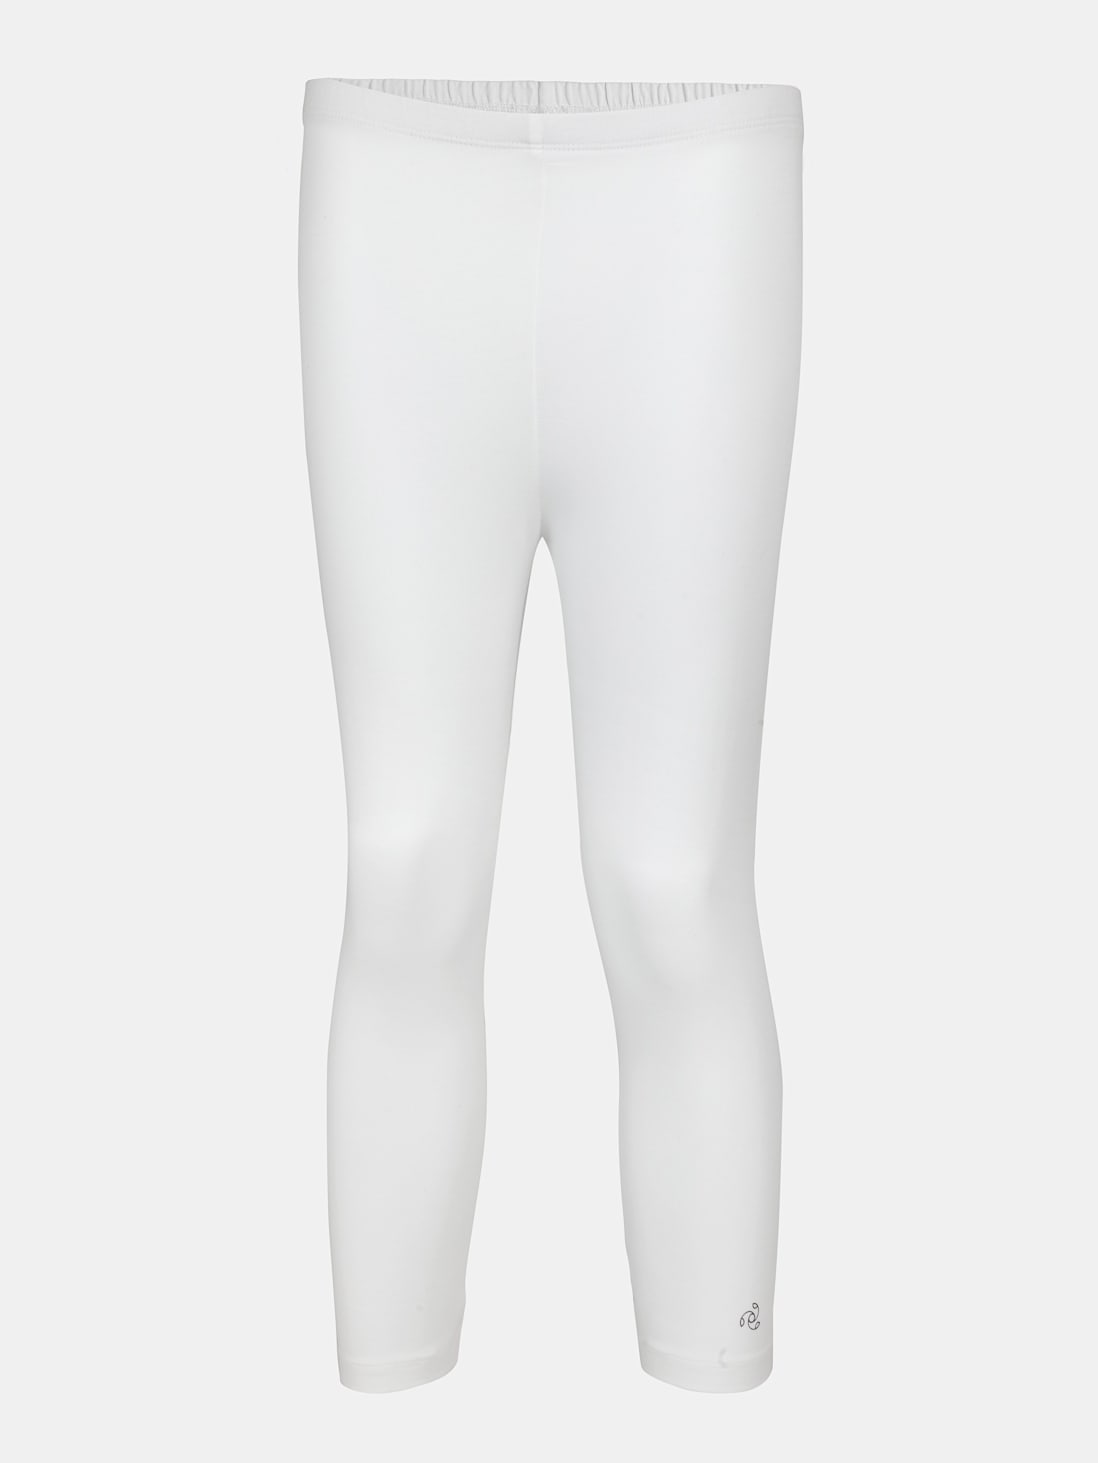 Go Colors Girls White Legging in Delhi at best price by Girls Fashion -  Justdial